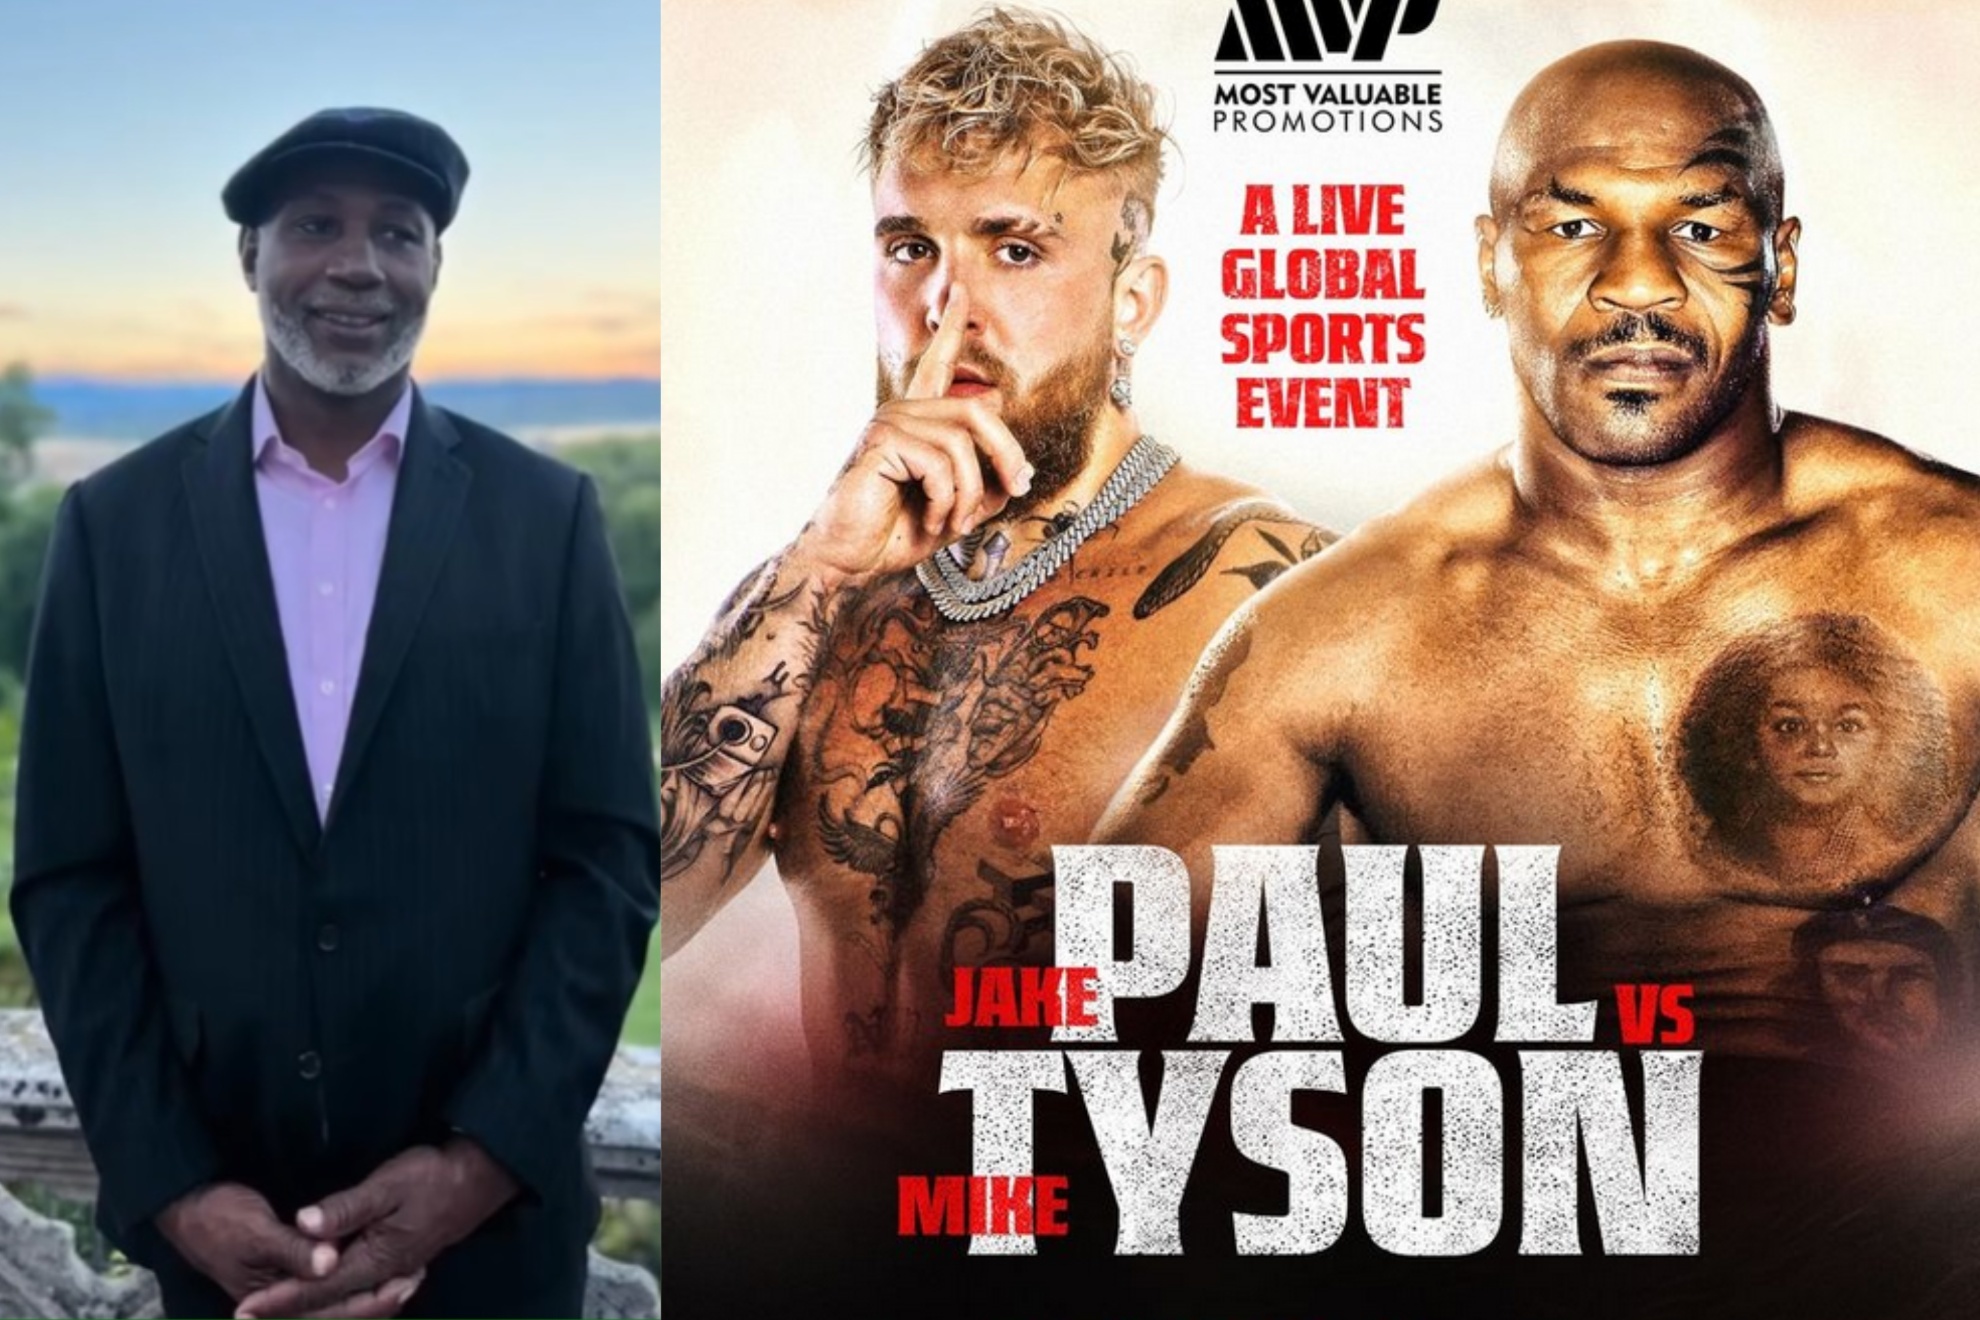 Lennox Lewis thinks Jake Paul is lucky that his bout with Mike Tyson is an exhibition fight.